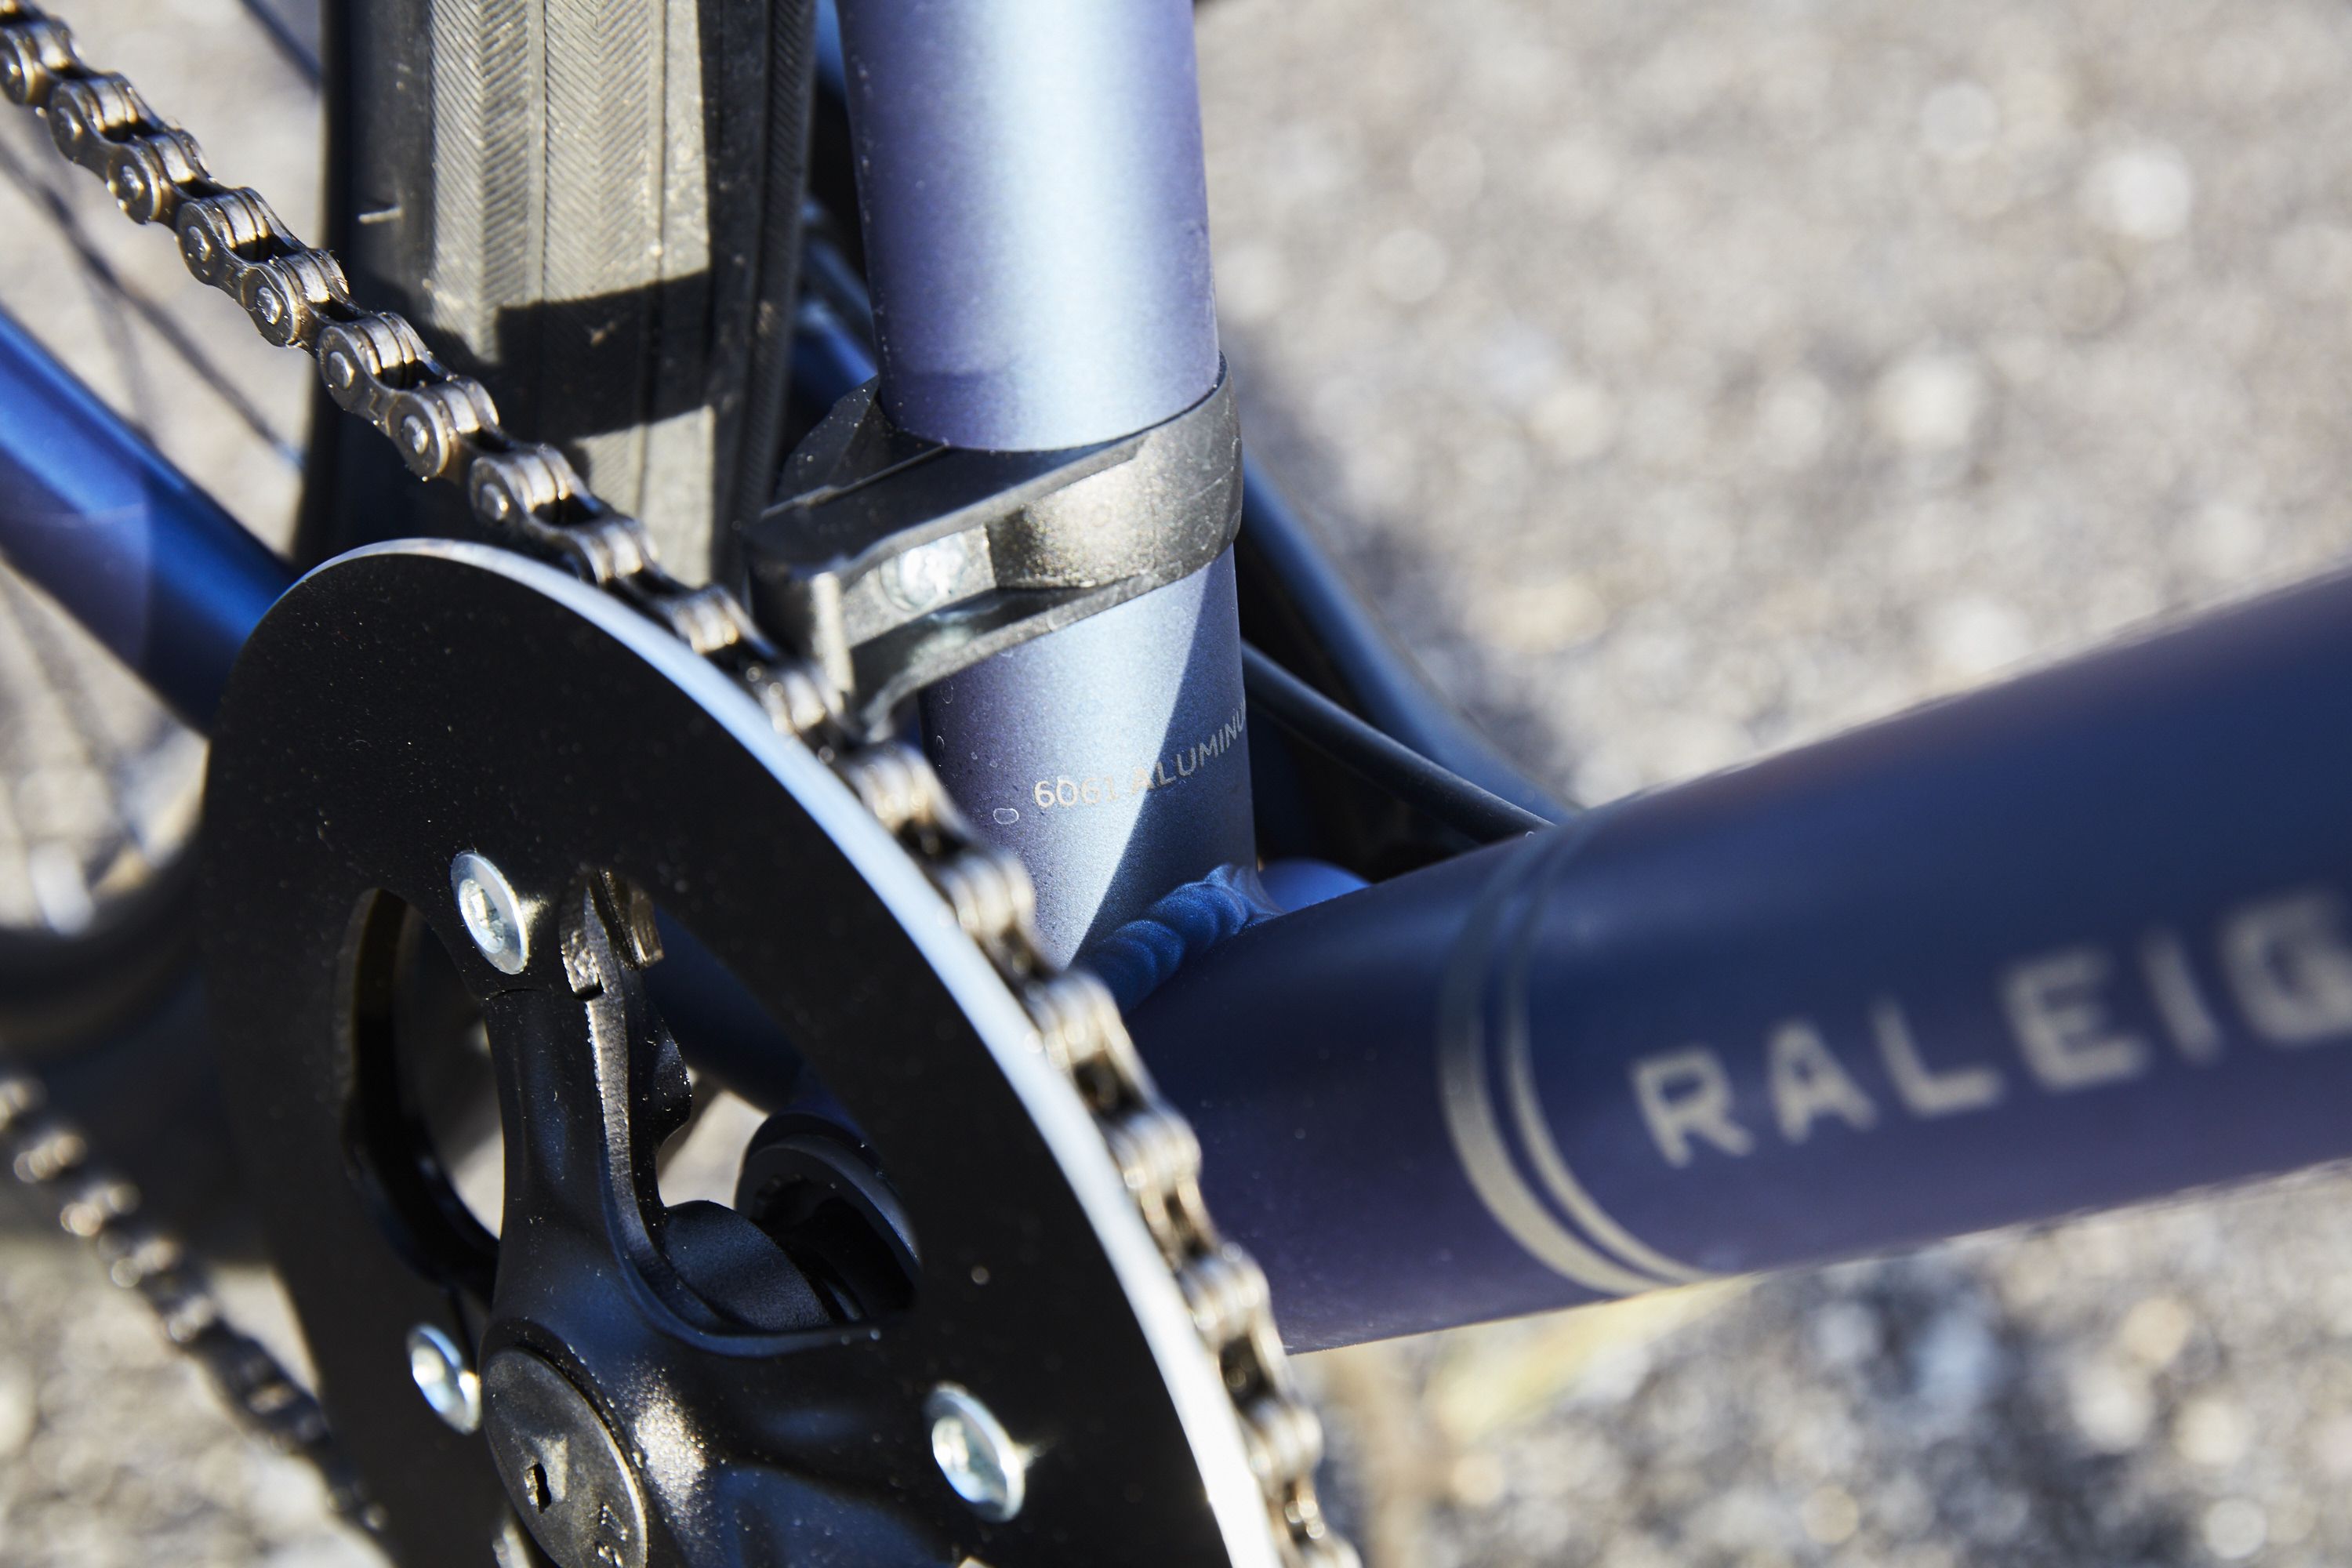 Raleigh Redux 1 Review Cheap City and Commuter Bike